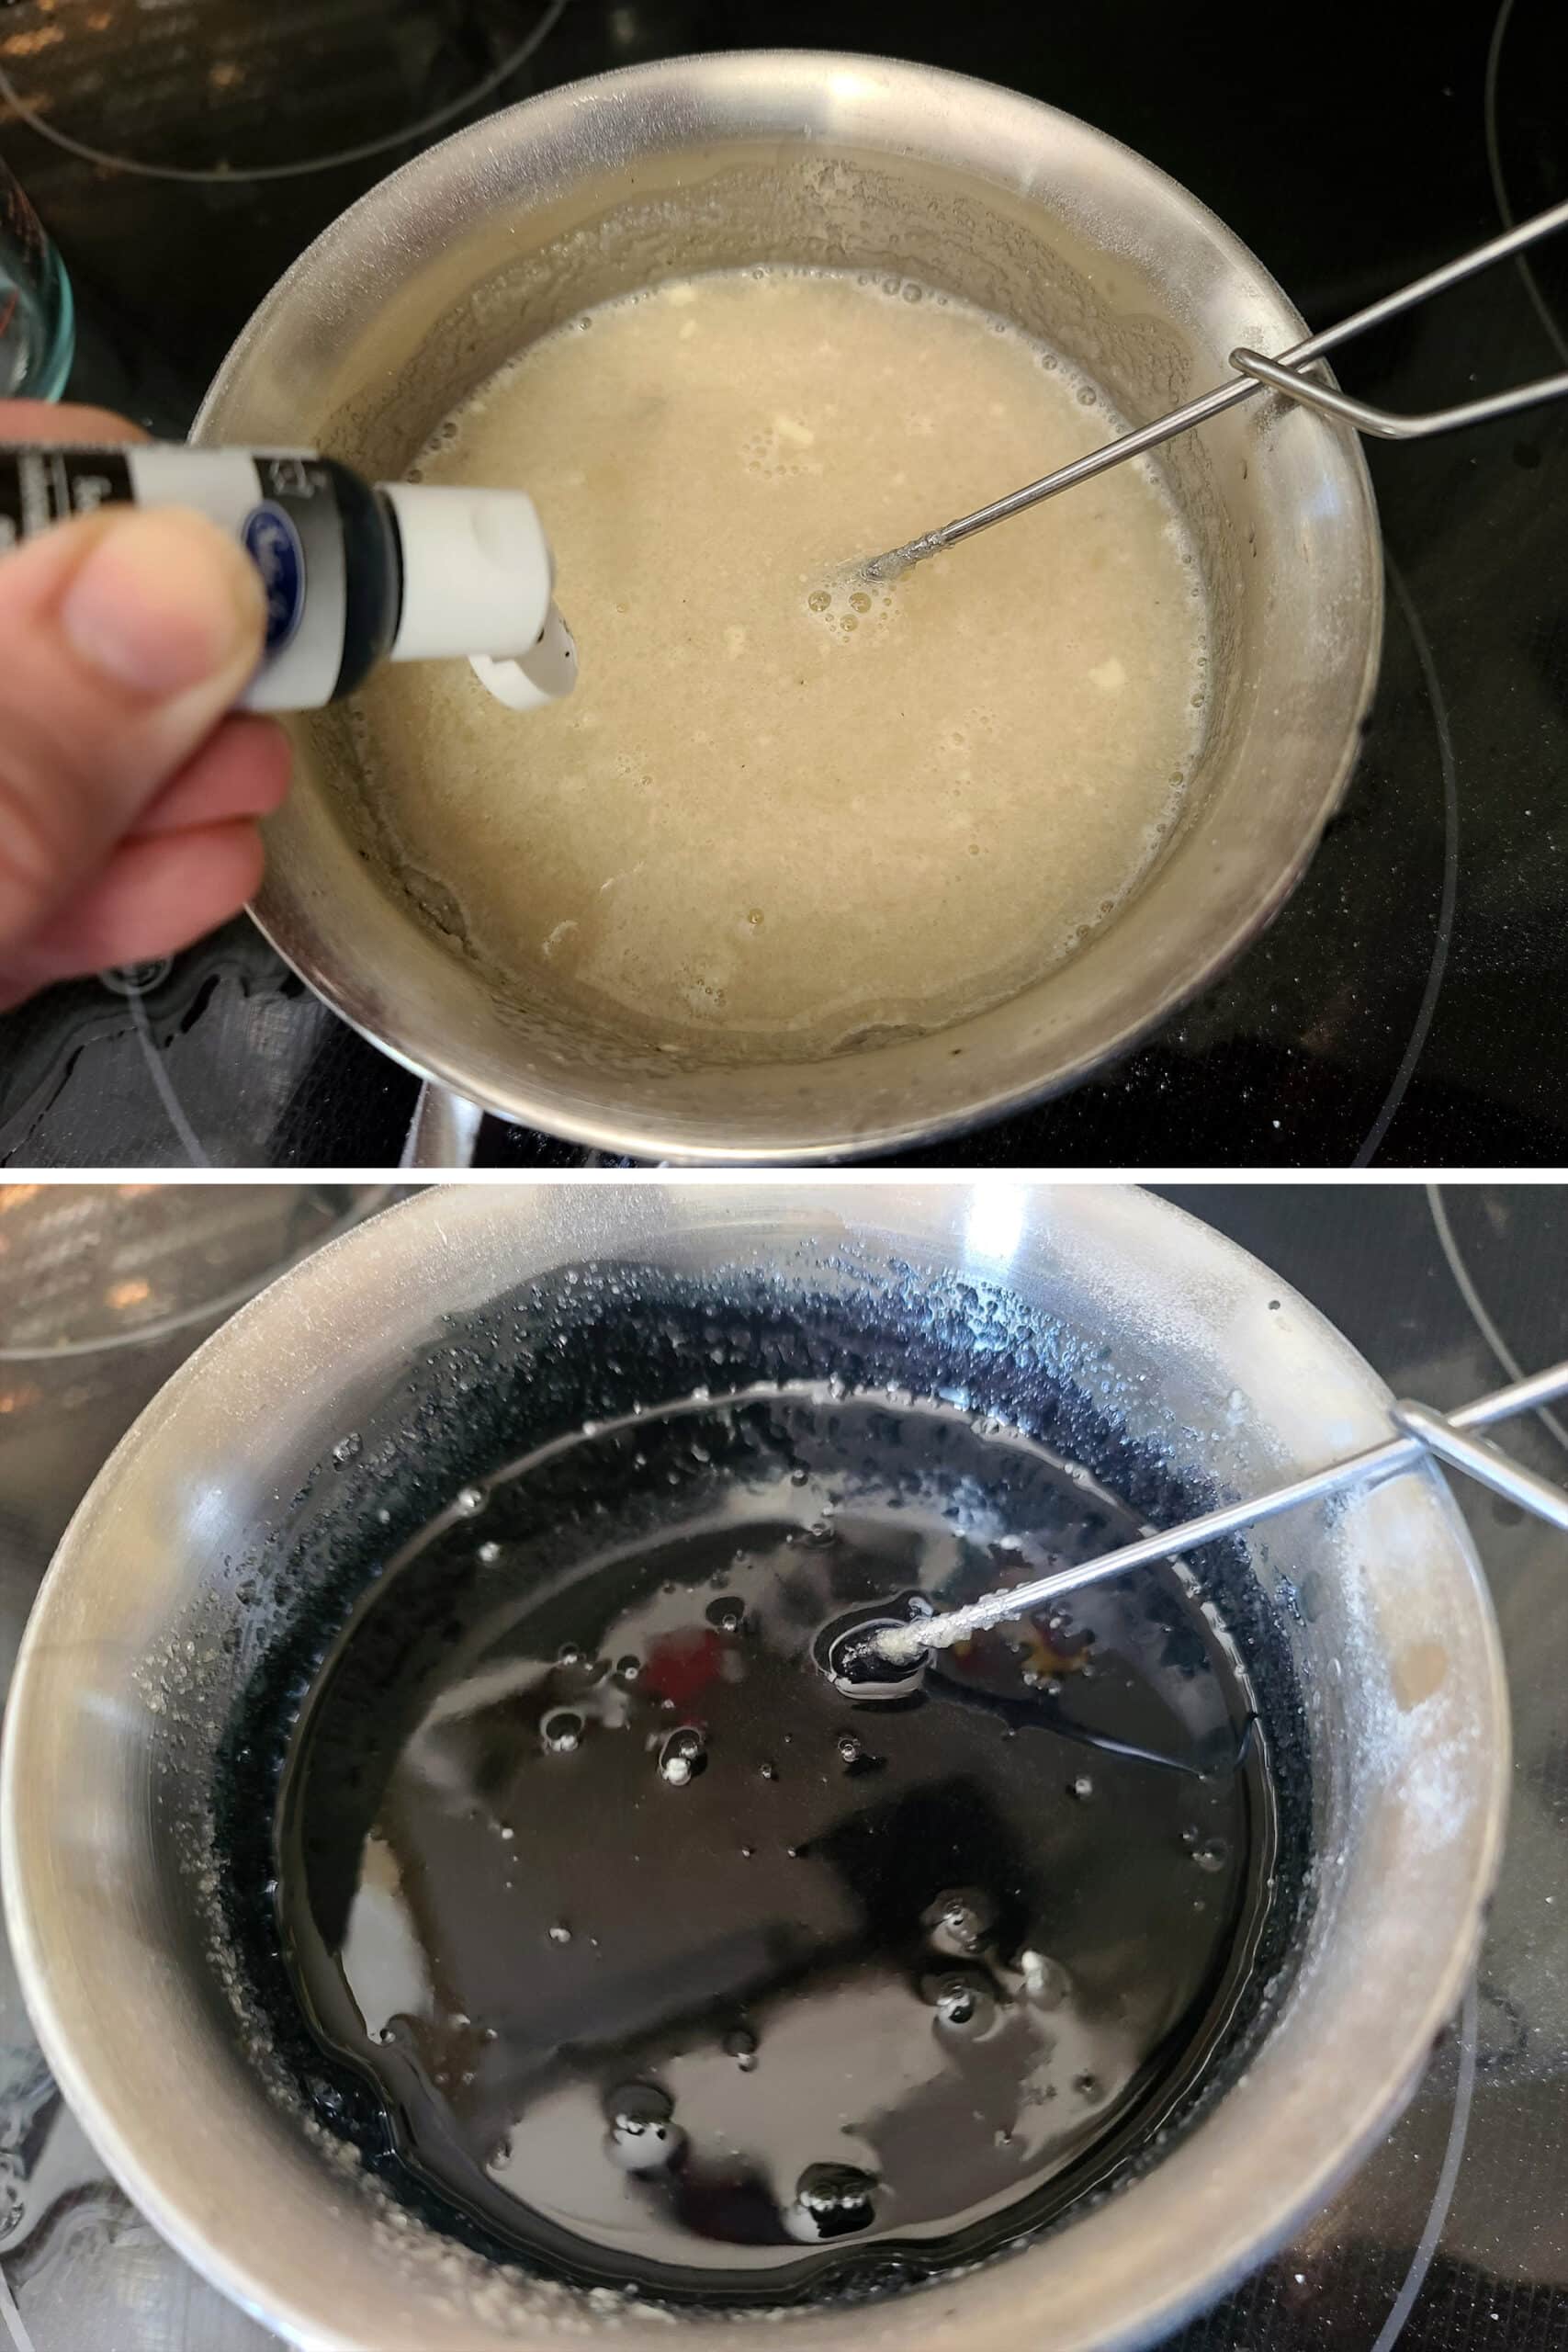 2 part image showing black gel food colouring being mixed into the gummy mixture.